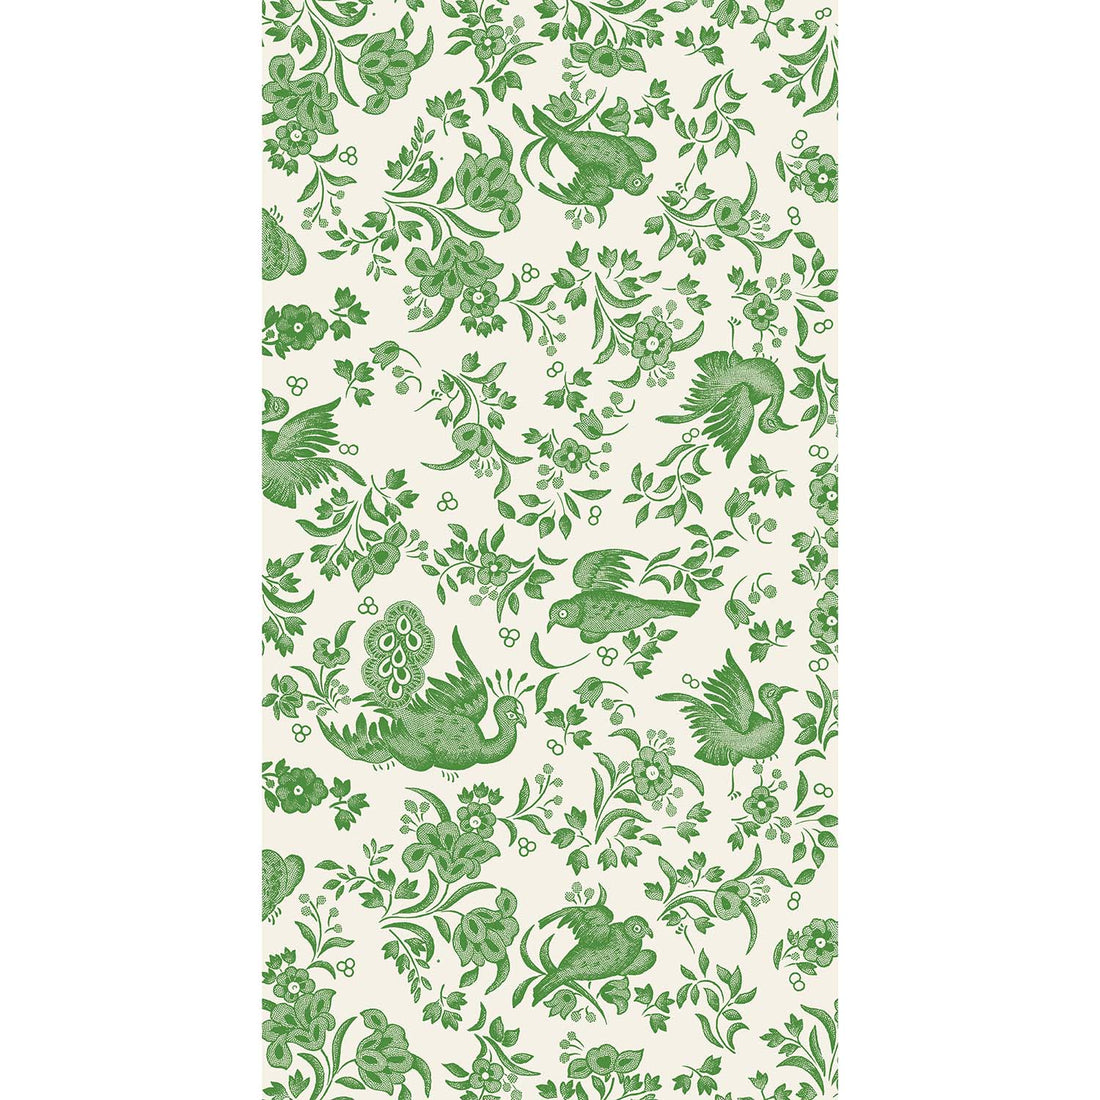 A rectangle guest napkin featuring a green bird and floral pattern on a white background, inspired by the ornamental bird pattern from Burleigh.